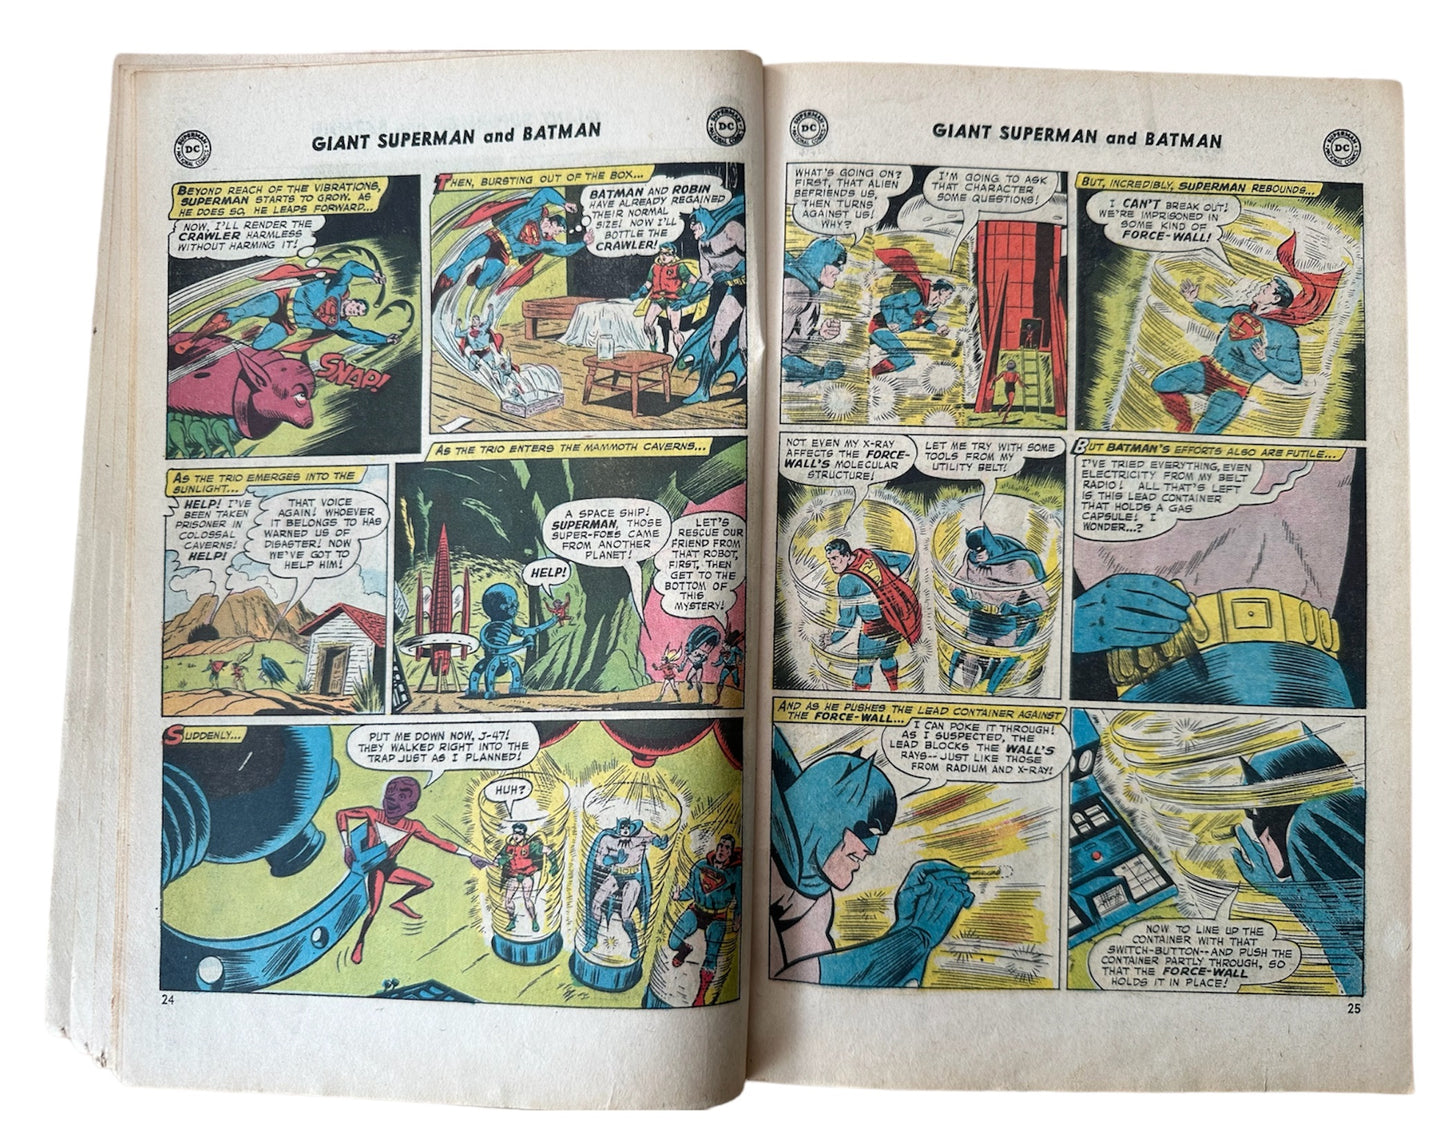 Vintage 1966 DC Worlds Finest Comics 80 Page Giant Issue Number 161 Starring Superman And Batman With Robin  - Good Condition Vintage Comic